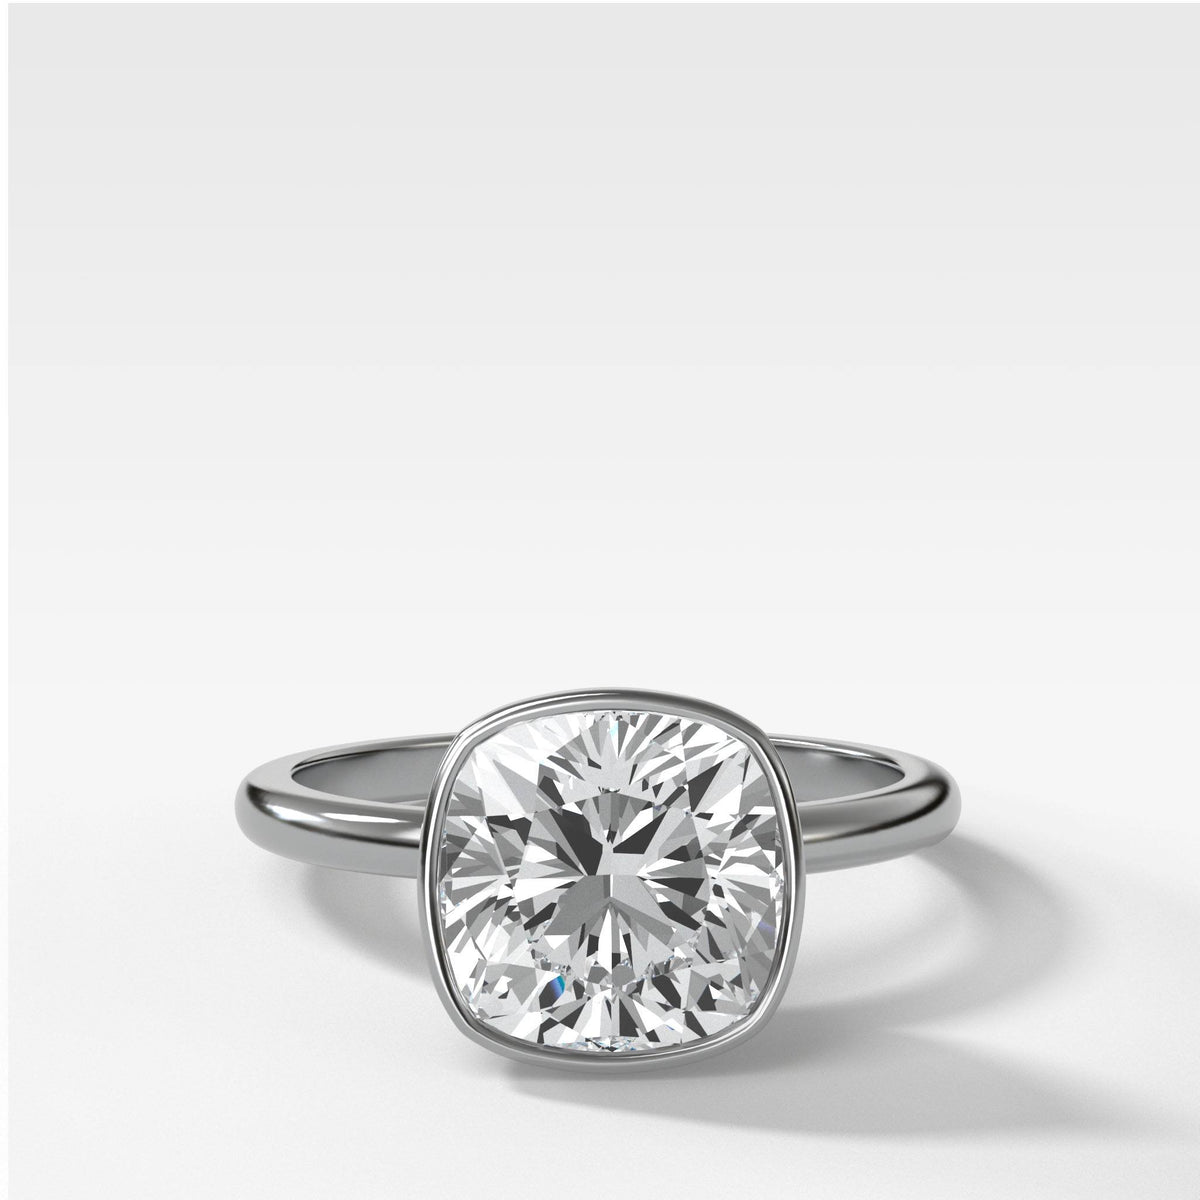 Bezel Penumbra Solitaire With Cushion Cut by Good Stone in White Gold